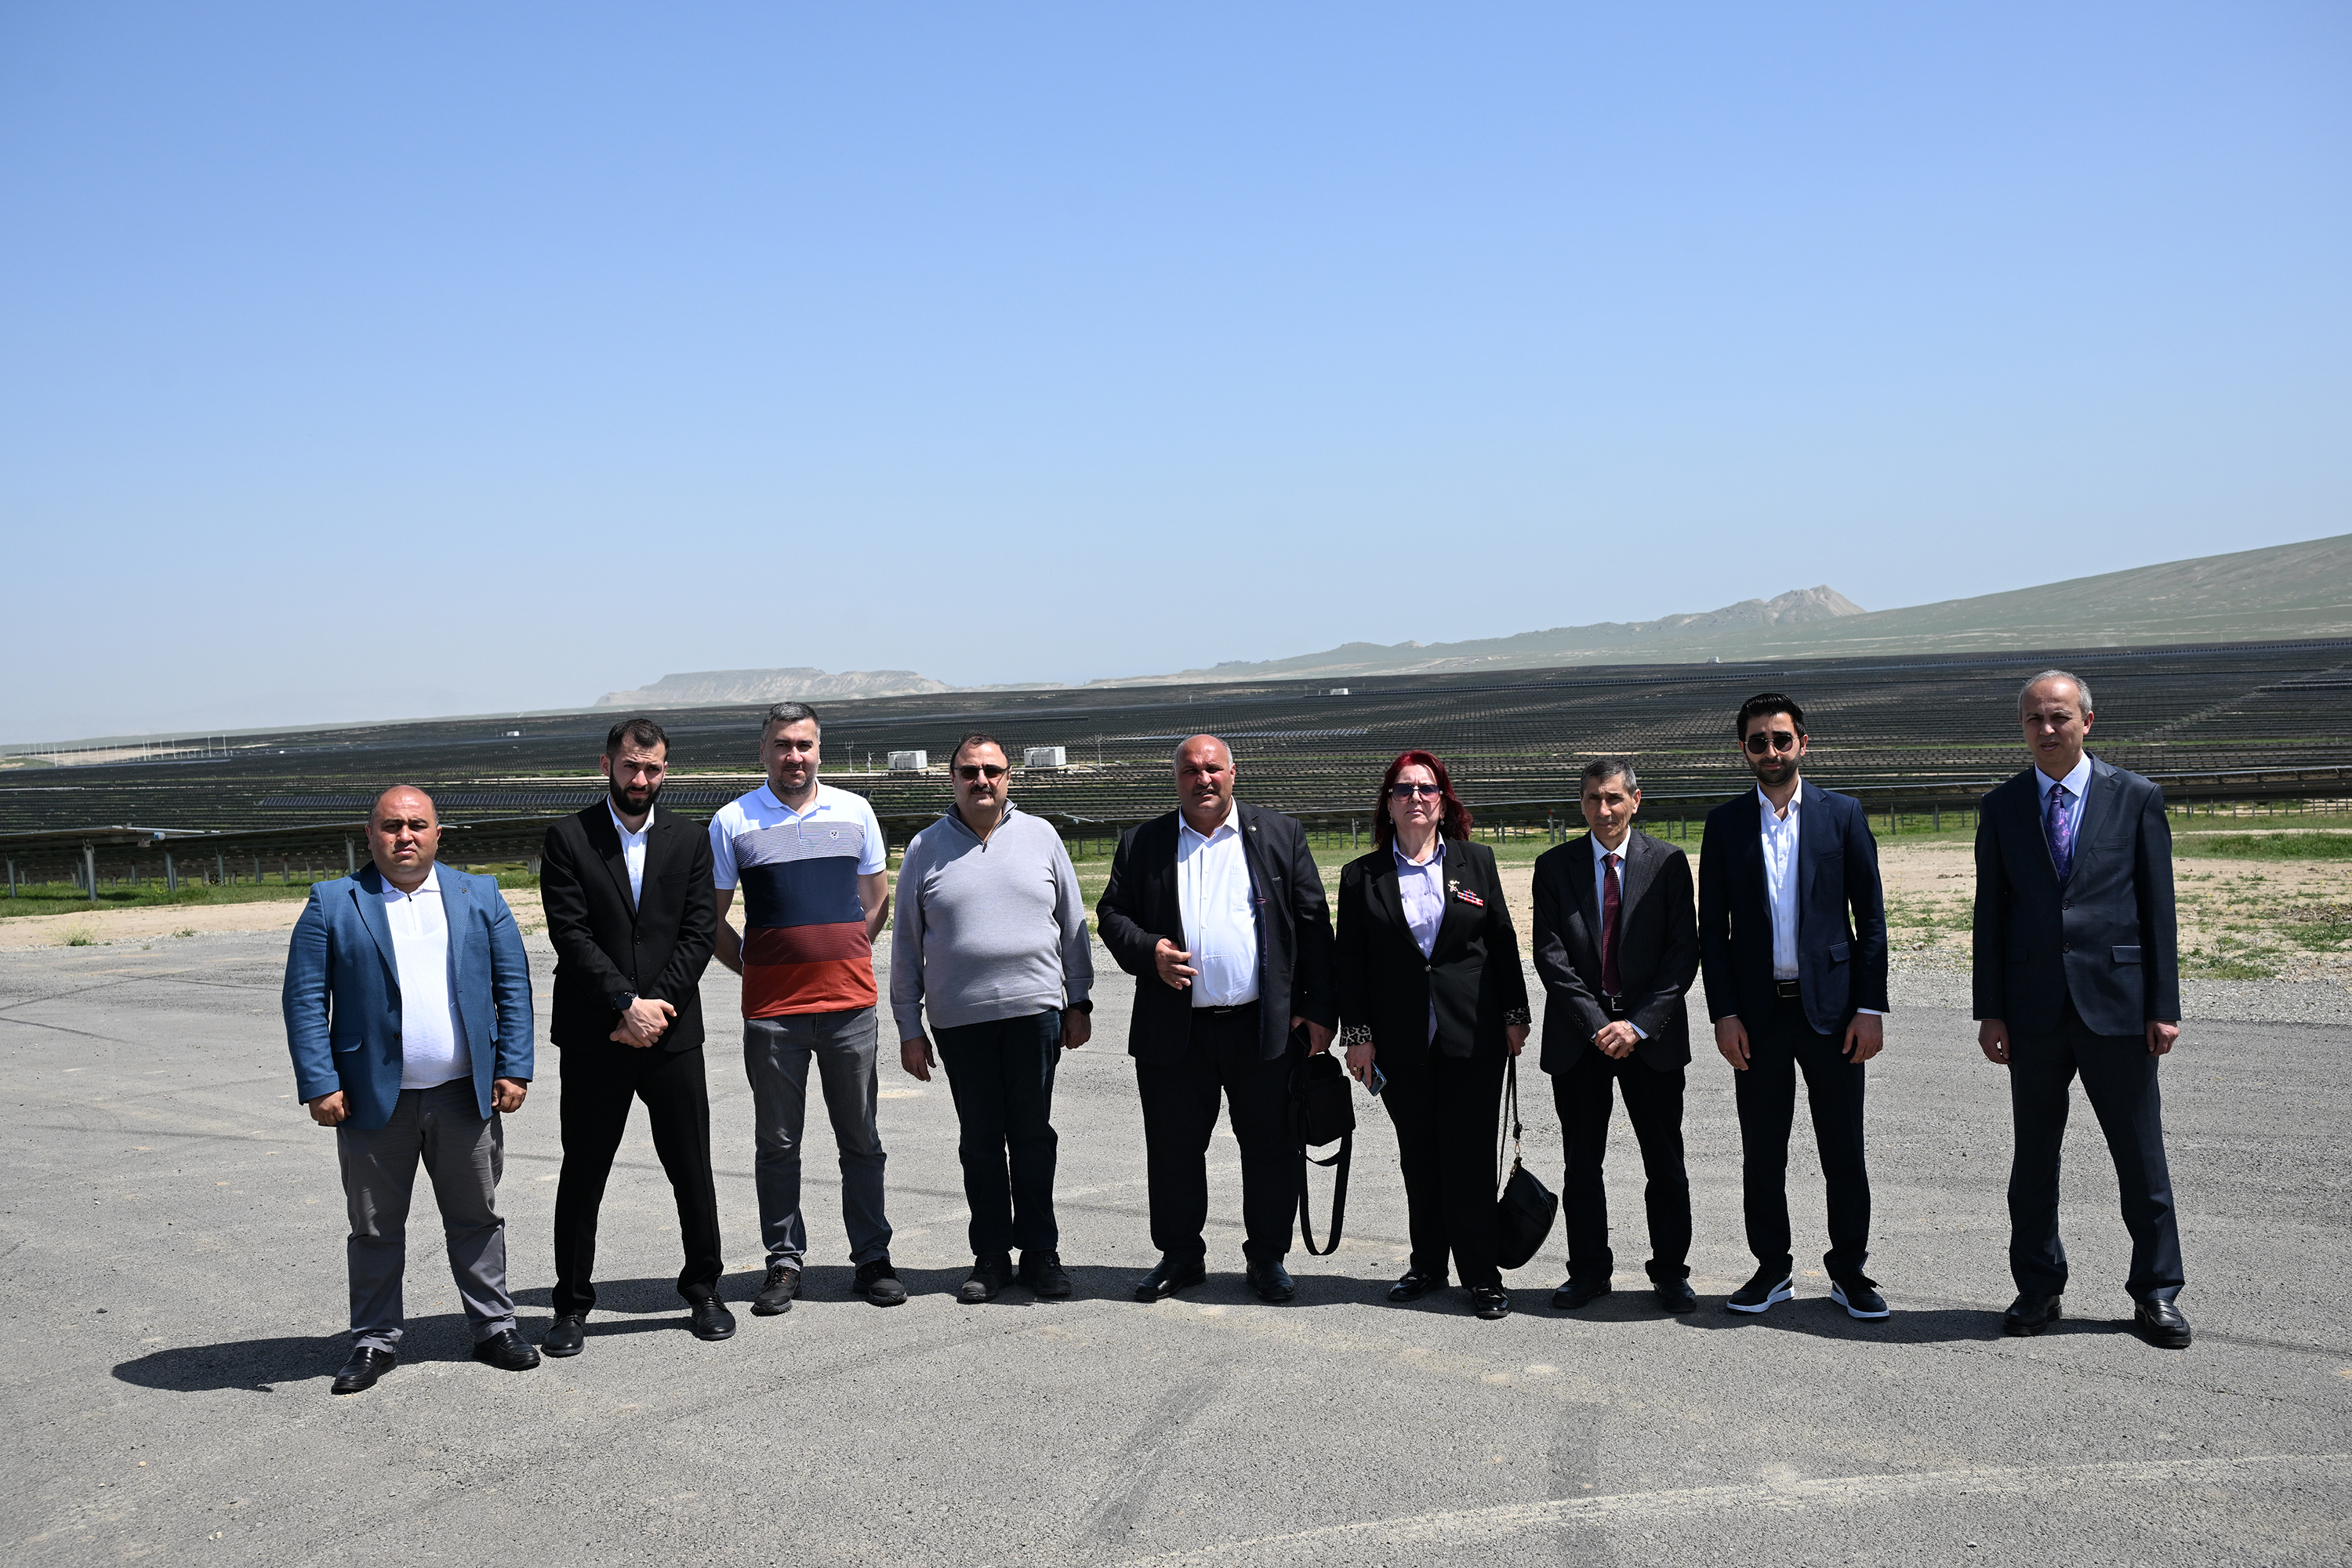 Members of the Public Council visited Garadagh Solar Power Plant